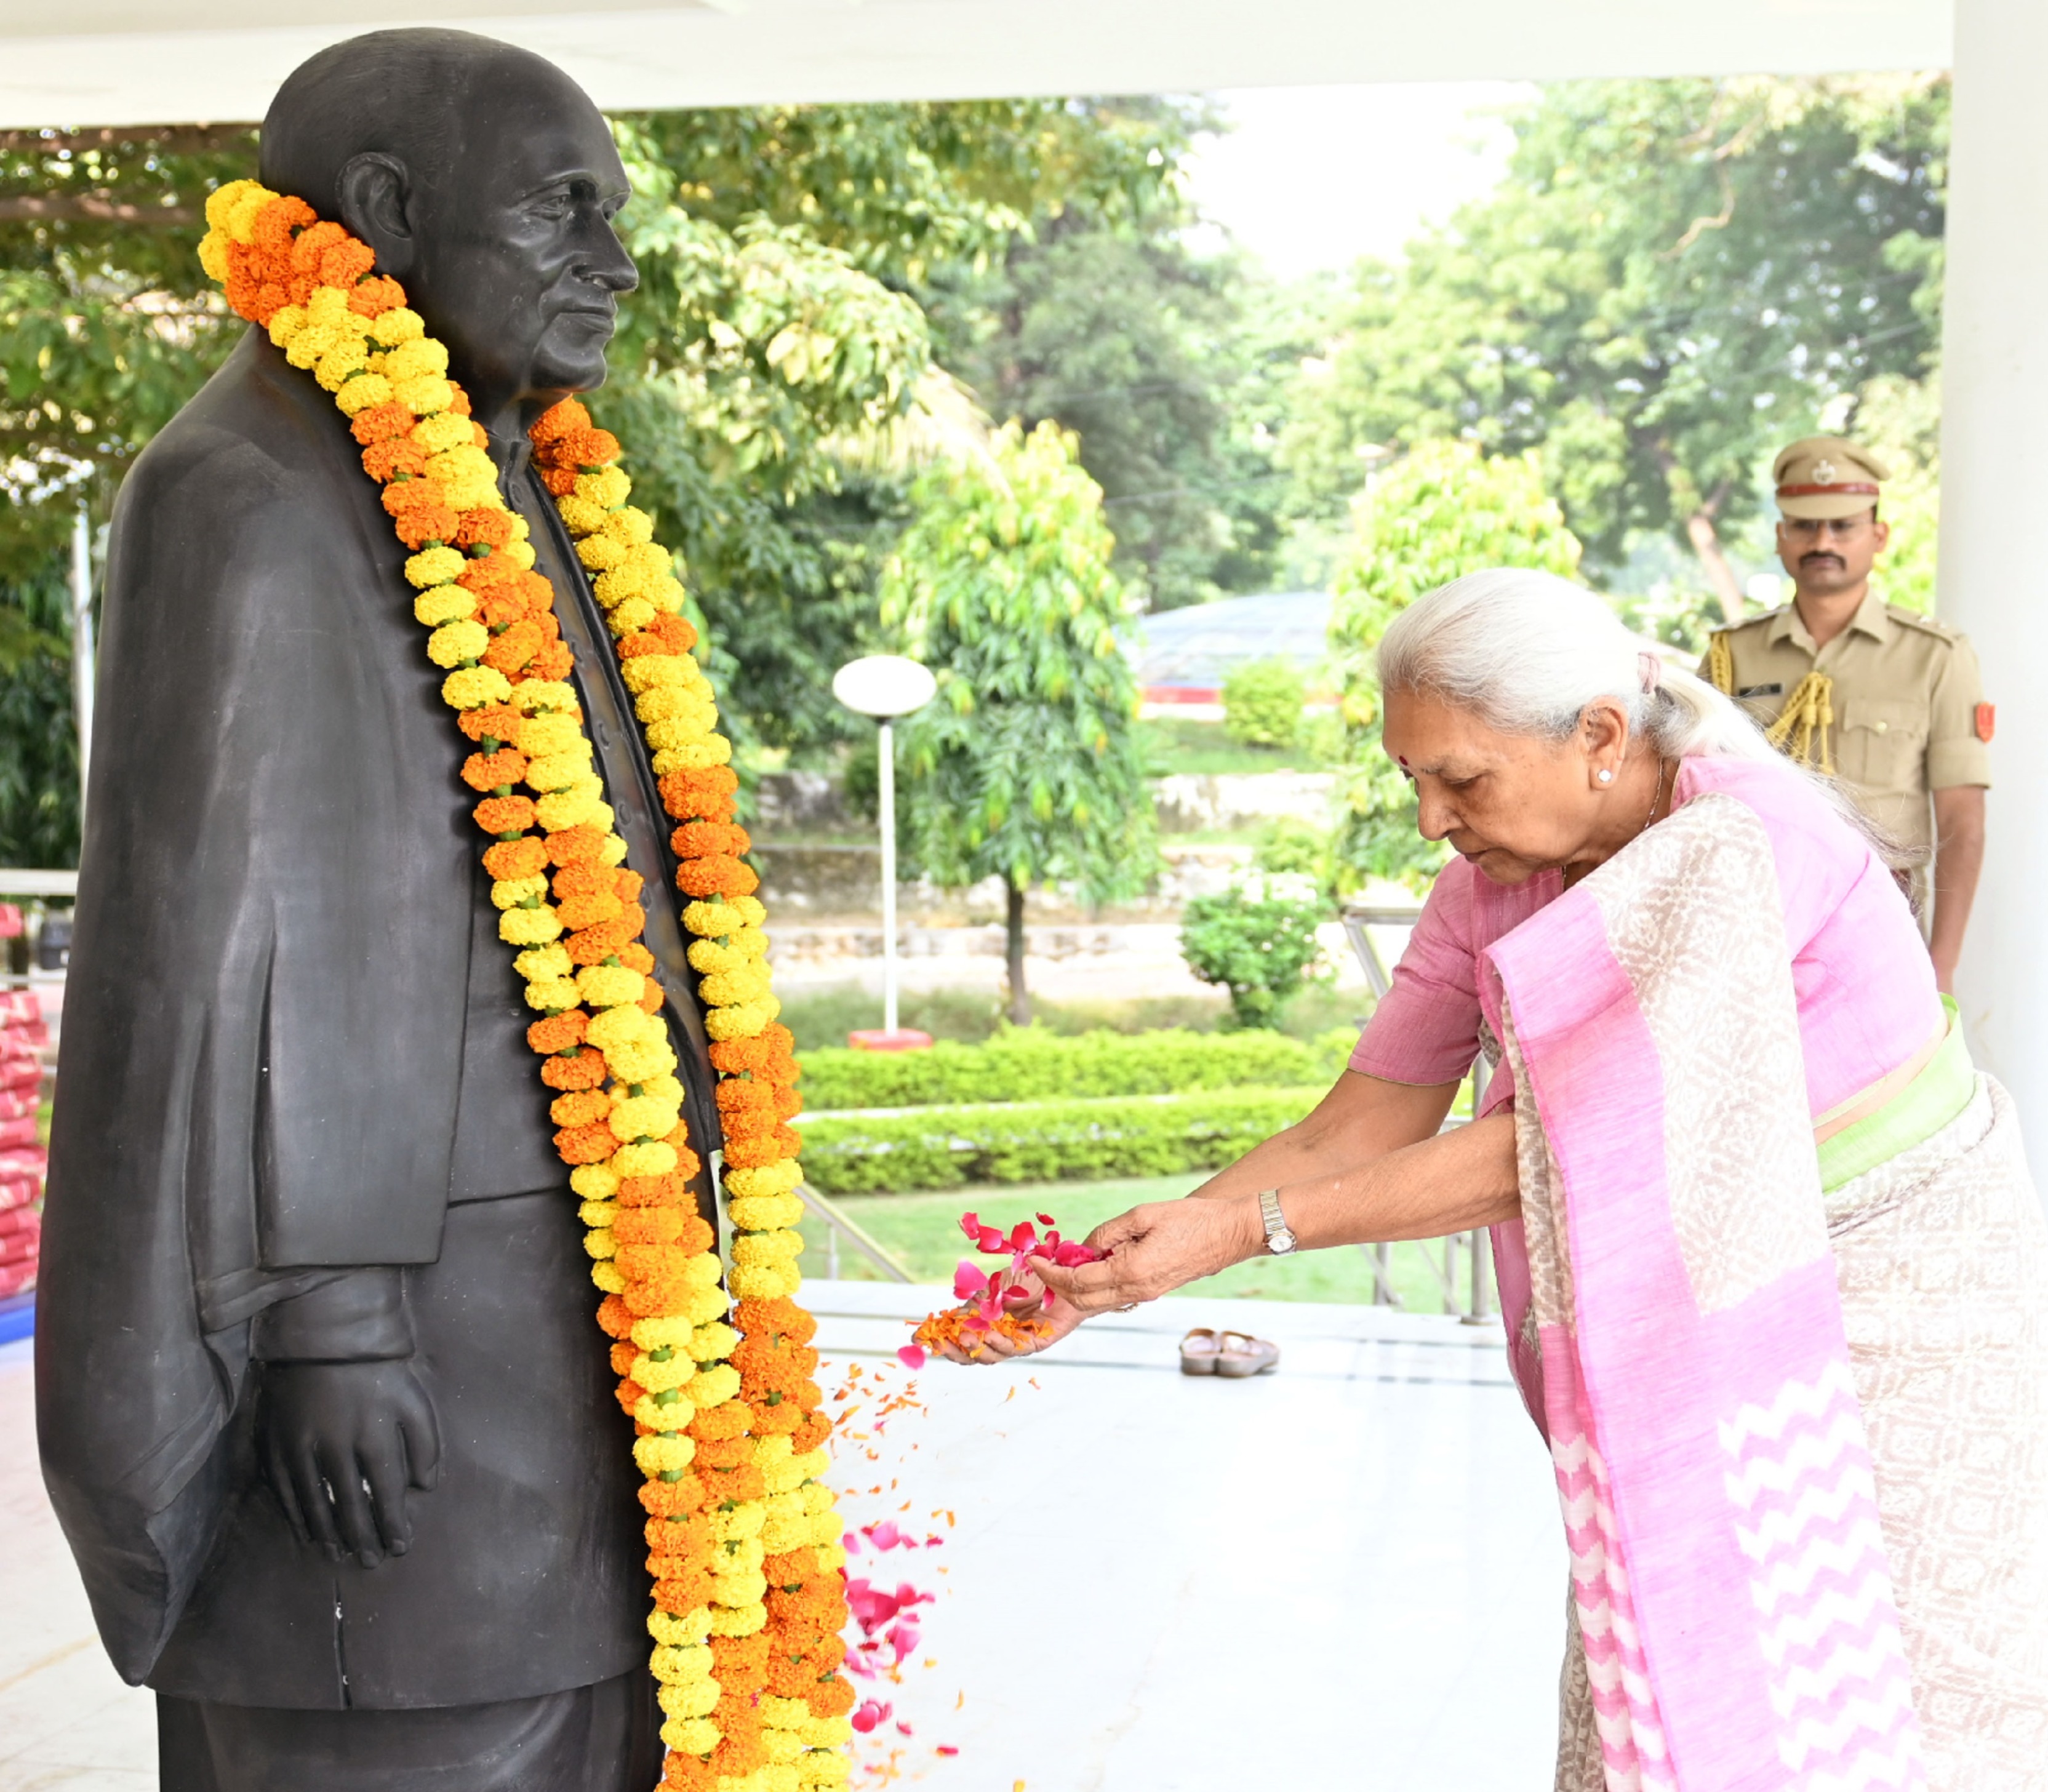 On the occasion of Sardar Vallabhbhai Patel Birth Anniversary, the Governor paid tribute to him by offering flowers on his statue at Raj Bhavan